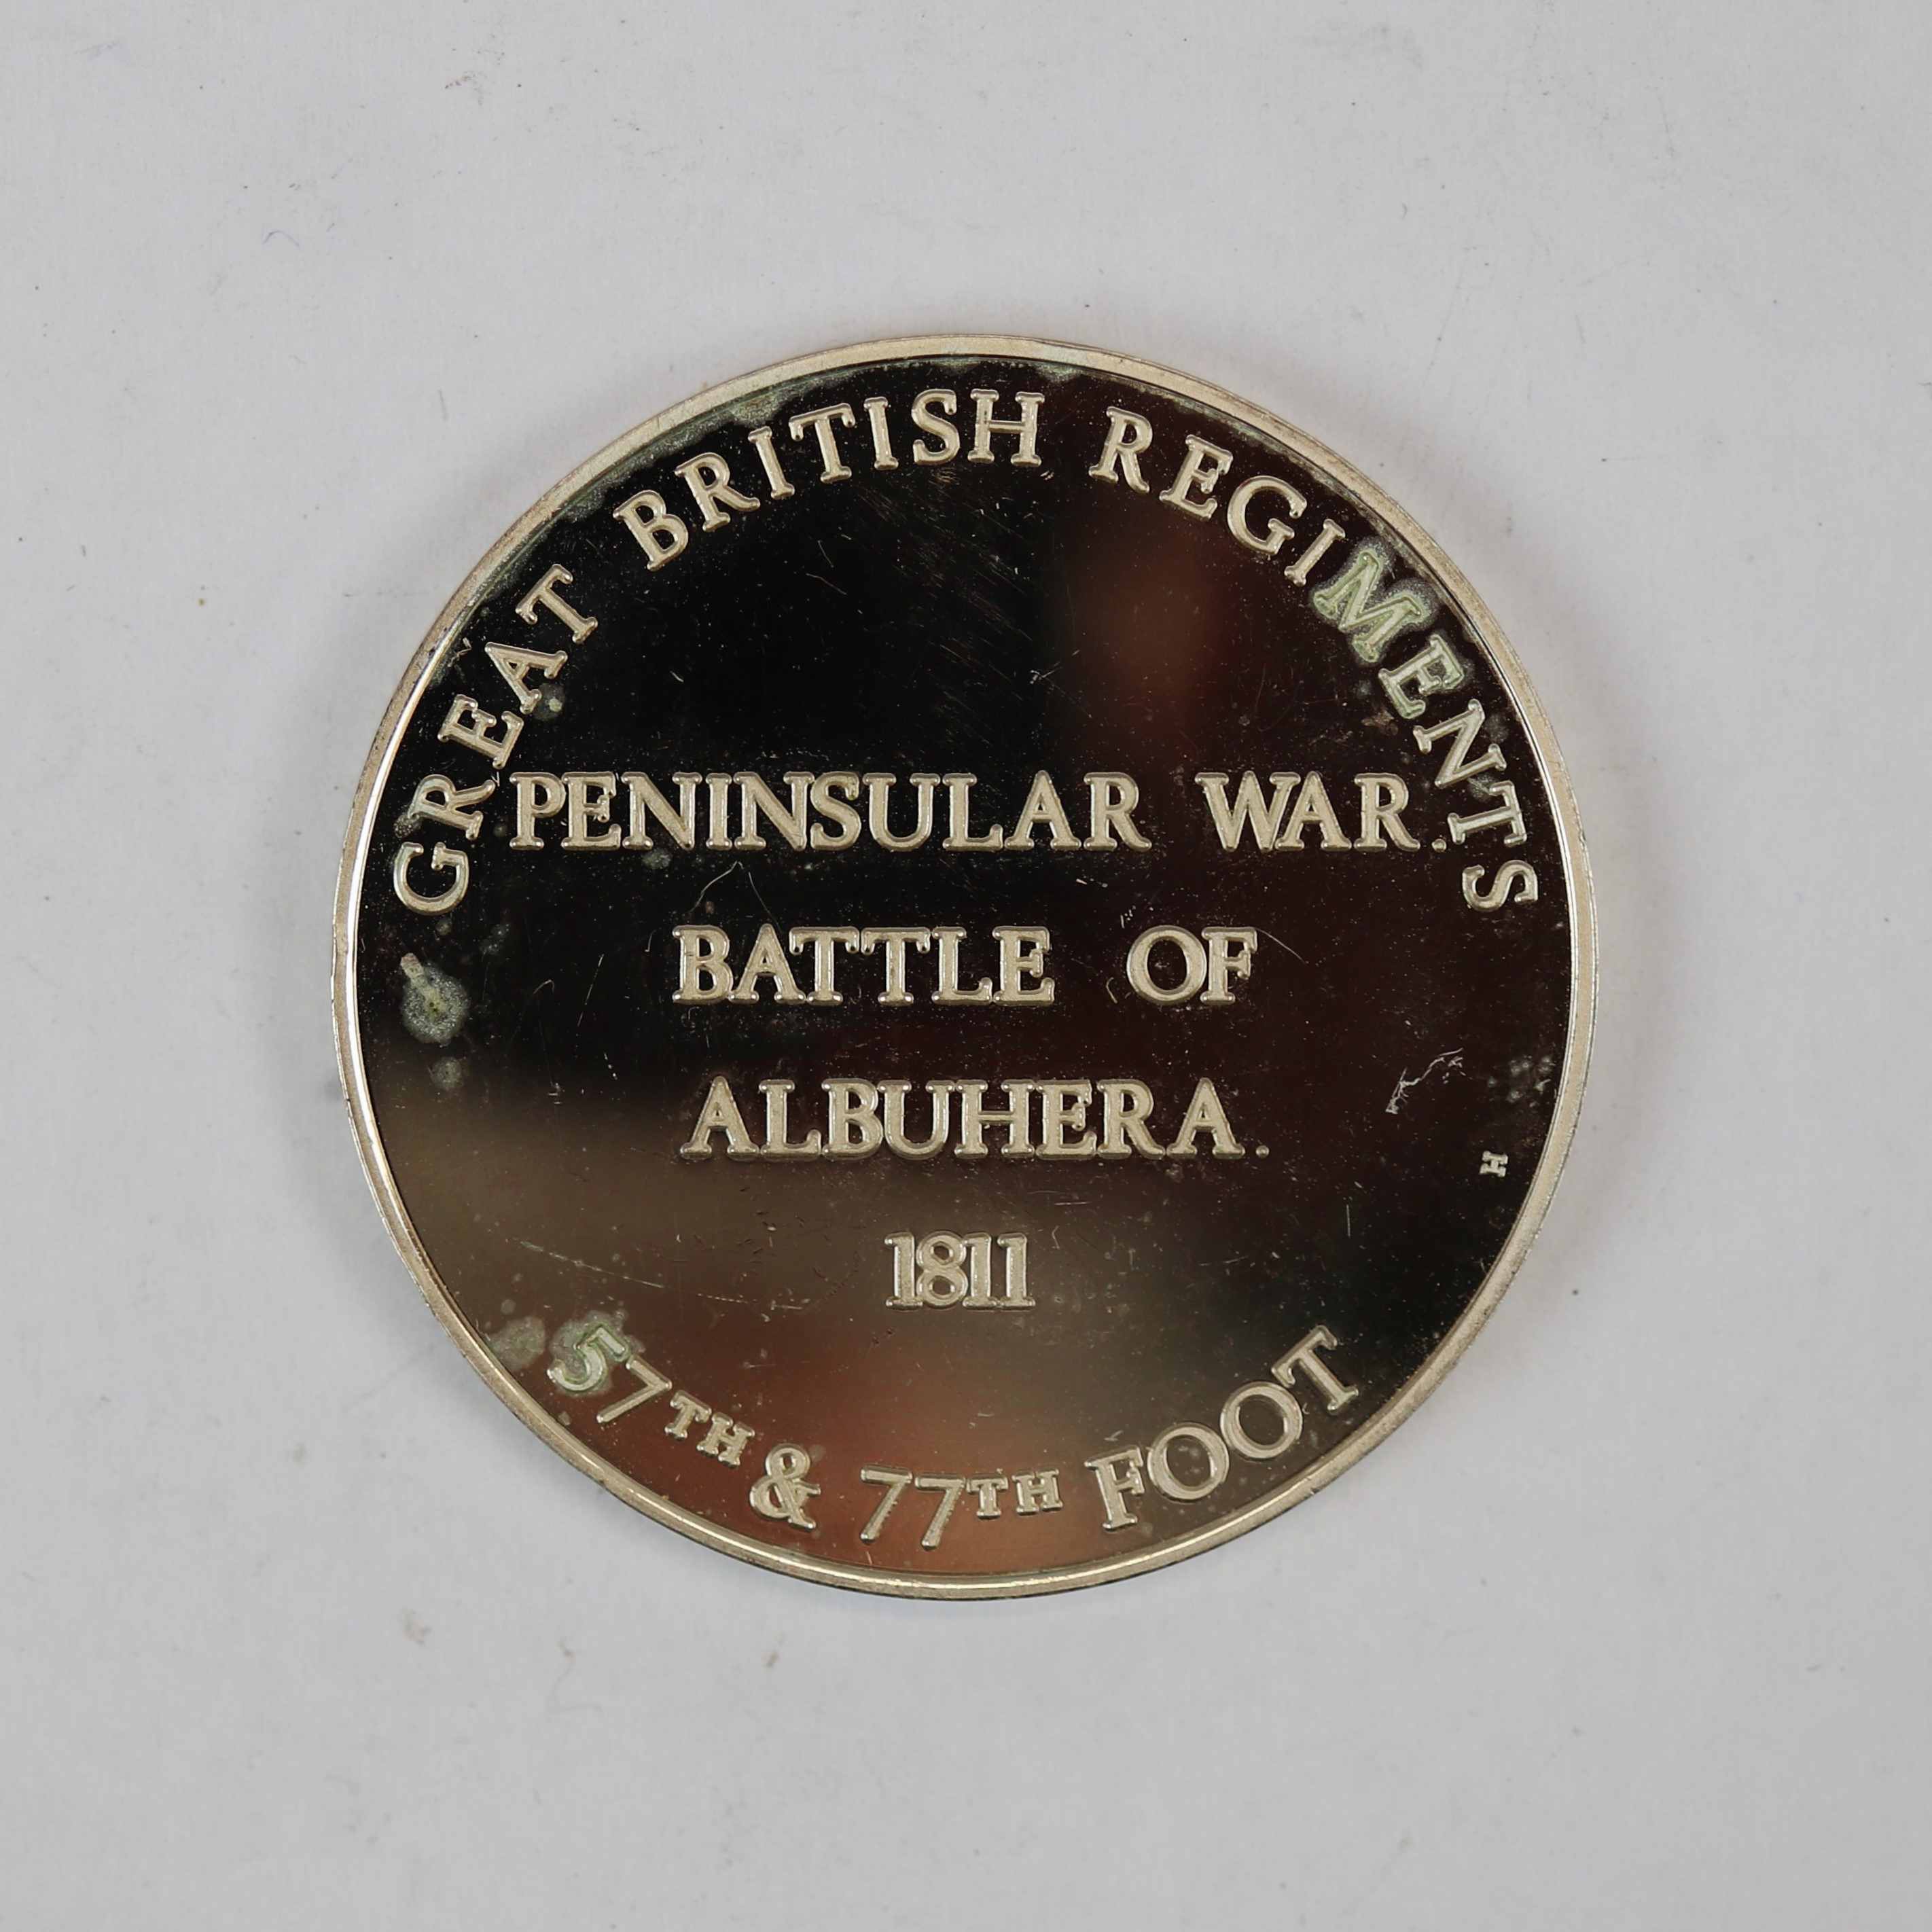 Hallmarked silver medal & matching insignia - The Middlesex Regiment - Image 2 of 2